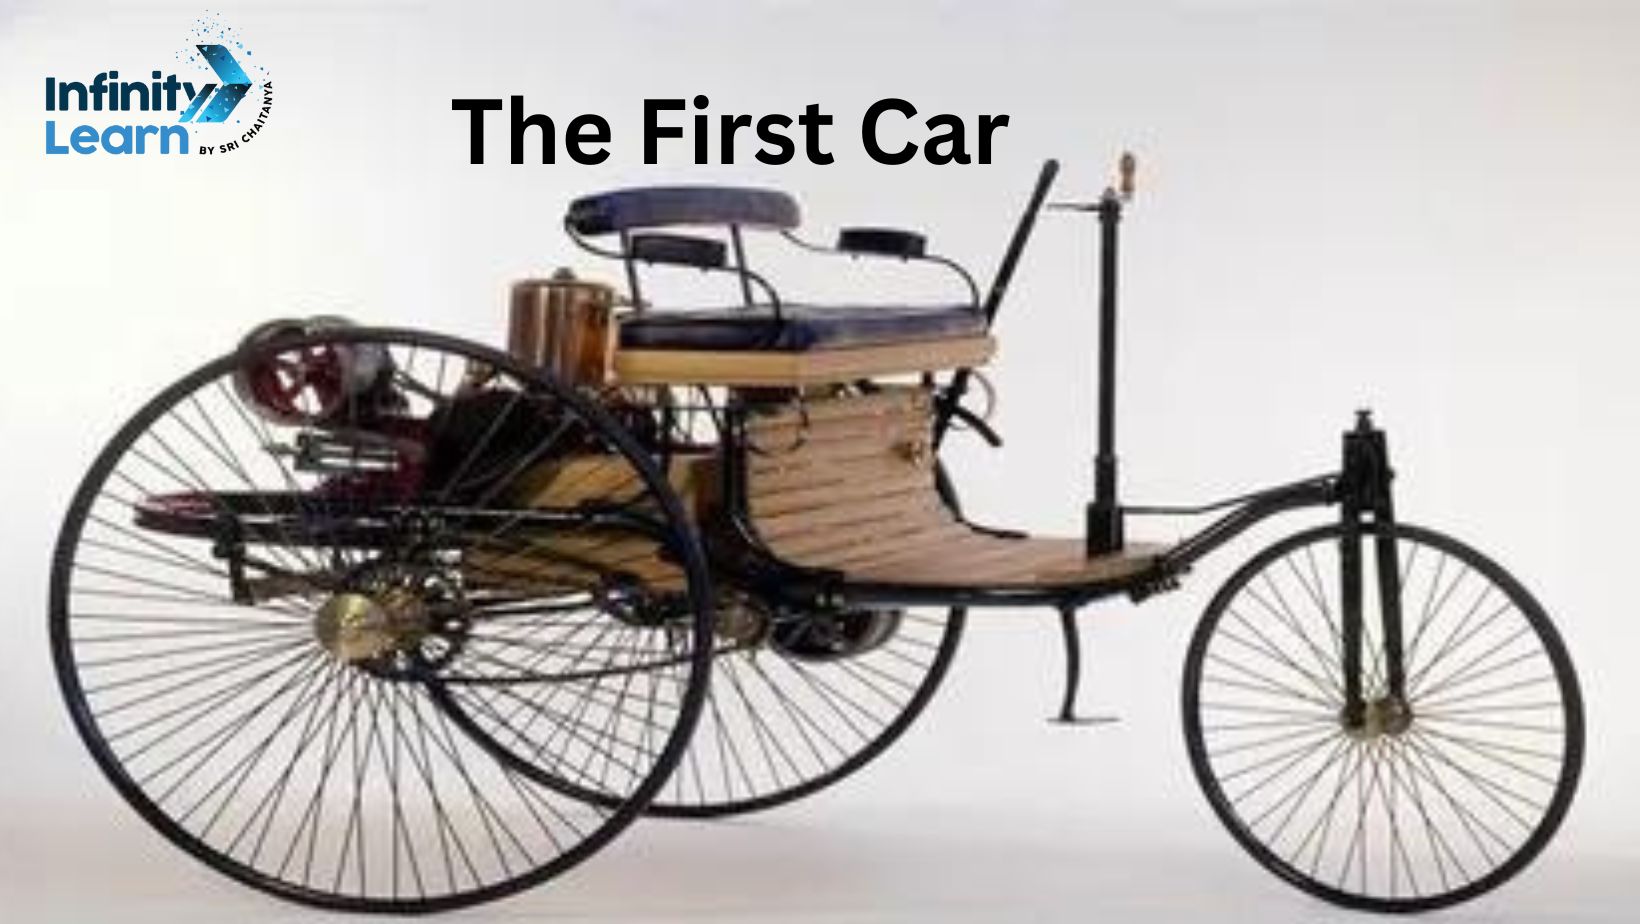 The First Car